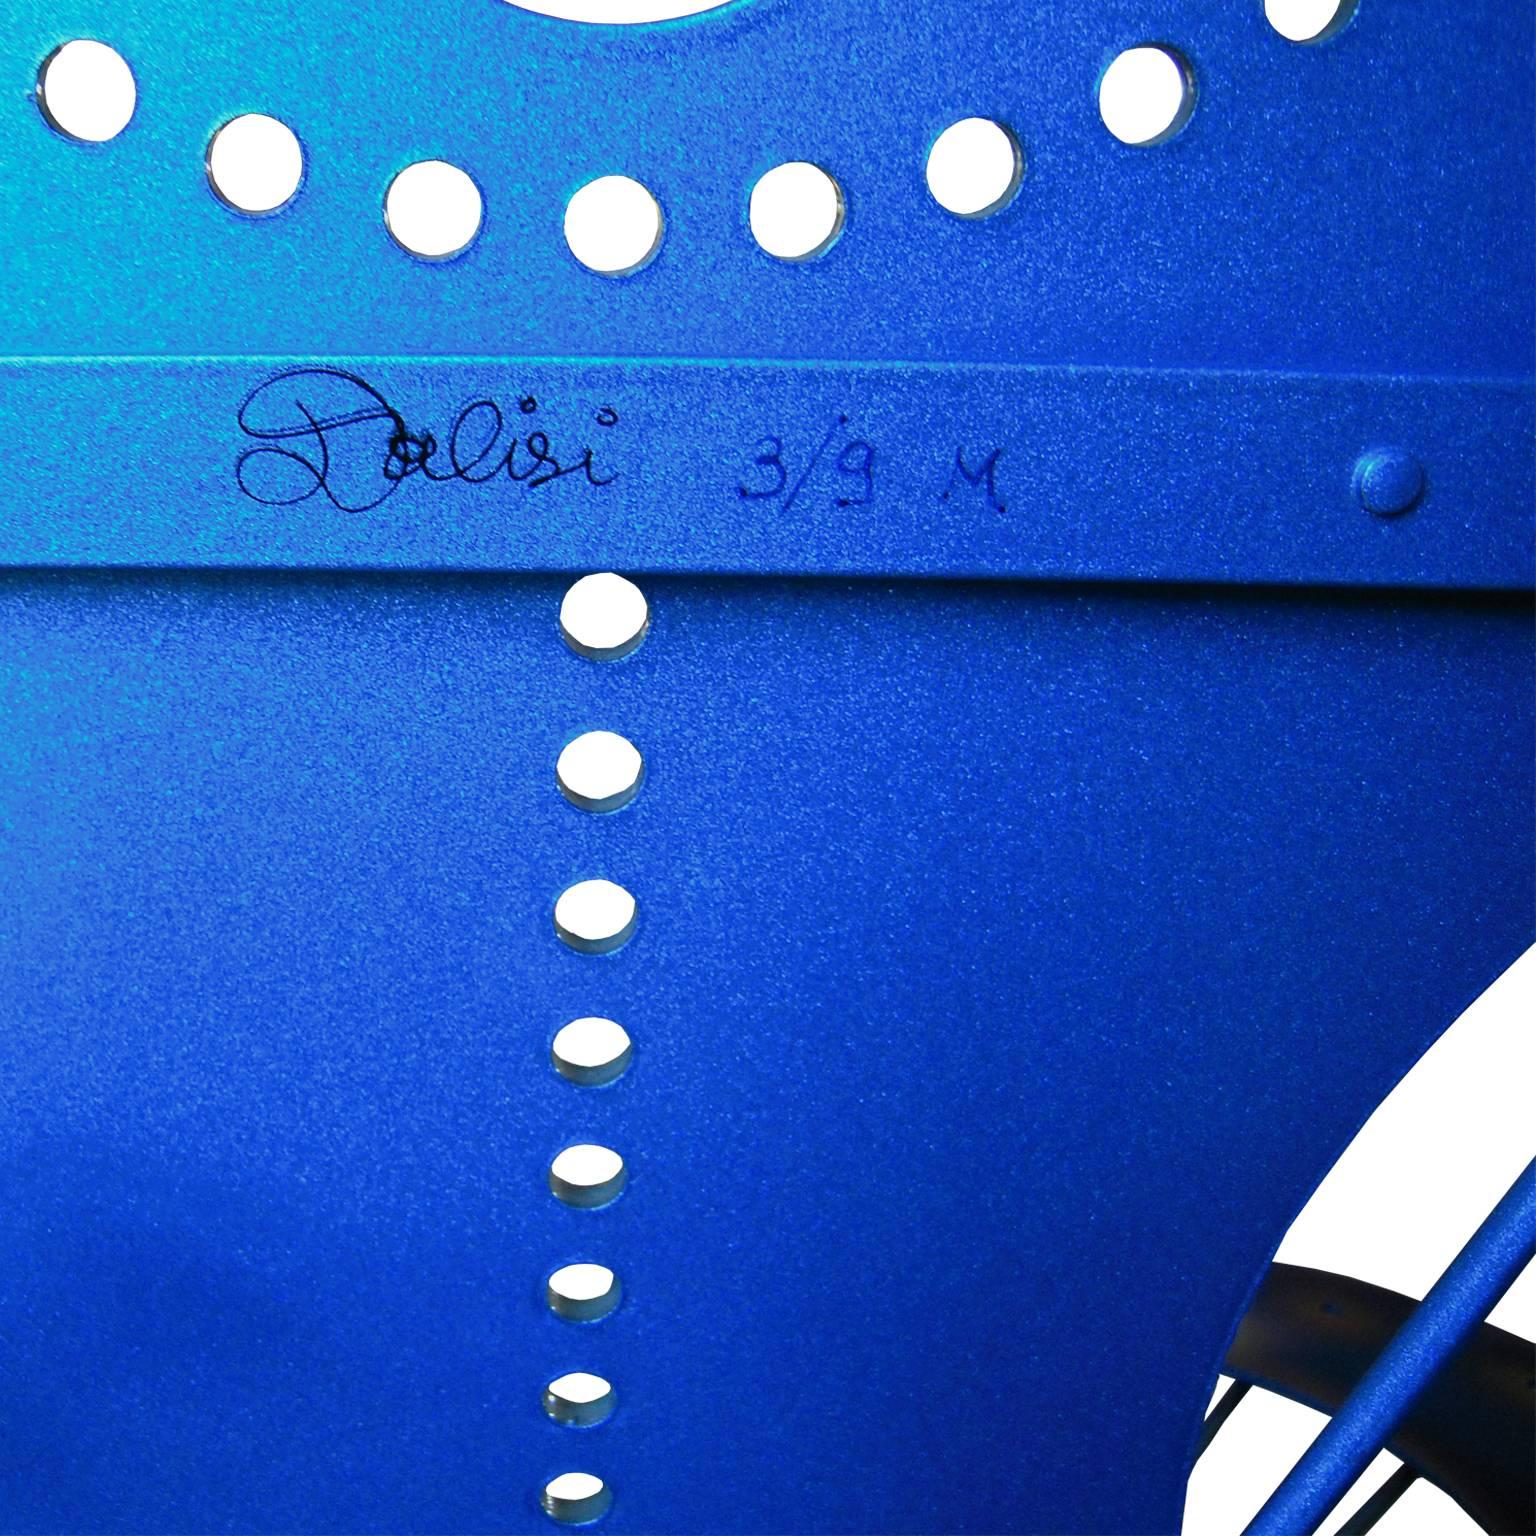 Italian Zanotta R. Dalisi Blue Painted Steel Bench, Limited Edition For Sale 5